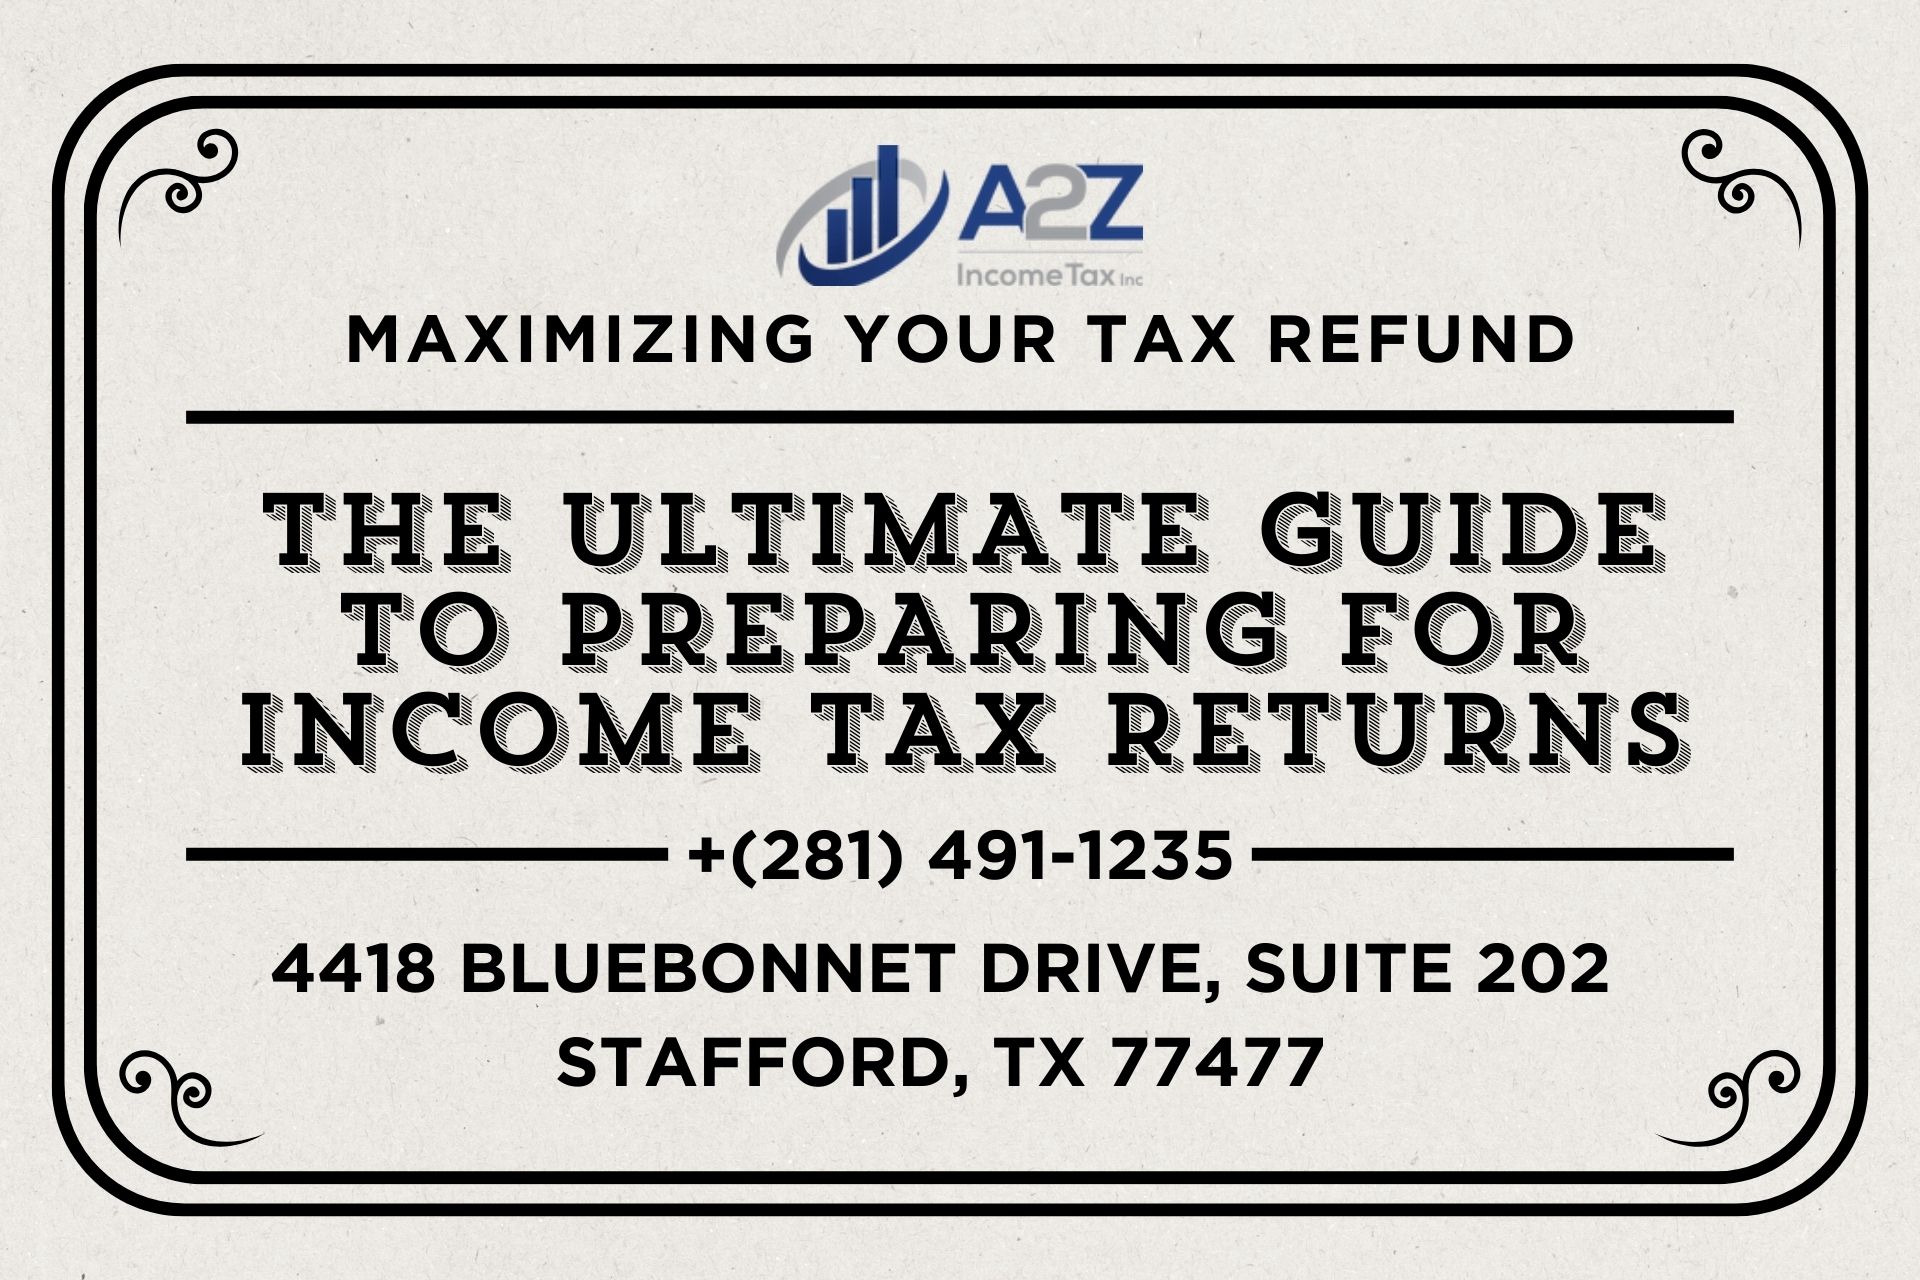 The Ultimate Guide to Preparing for Income Tax Returns - a2z Income Tax